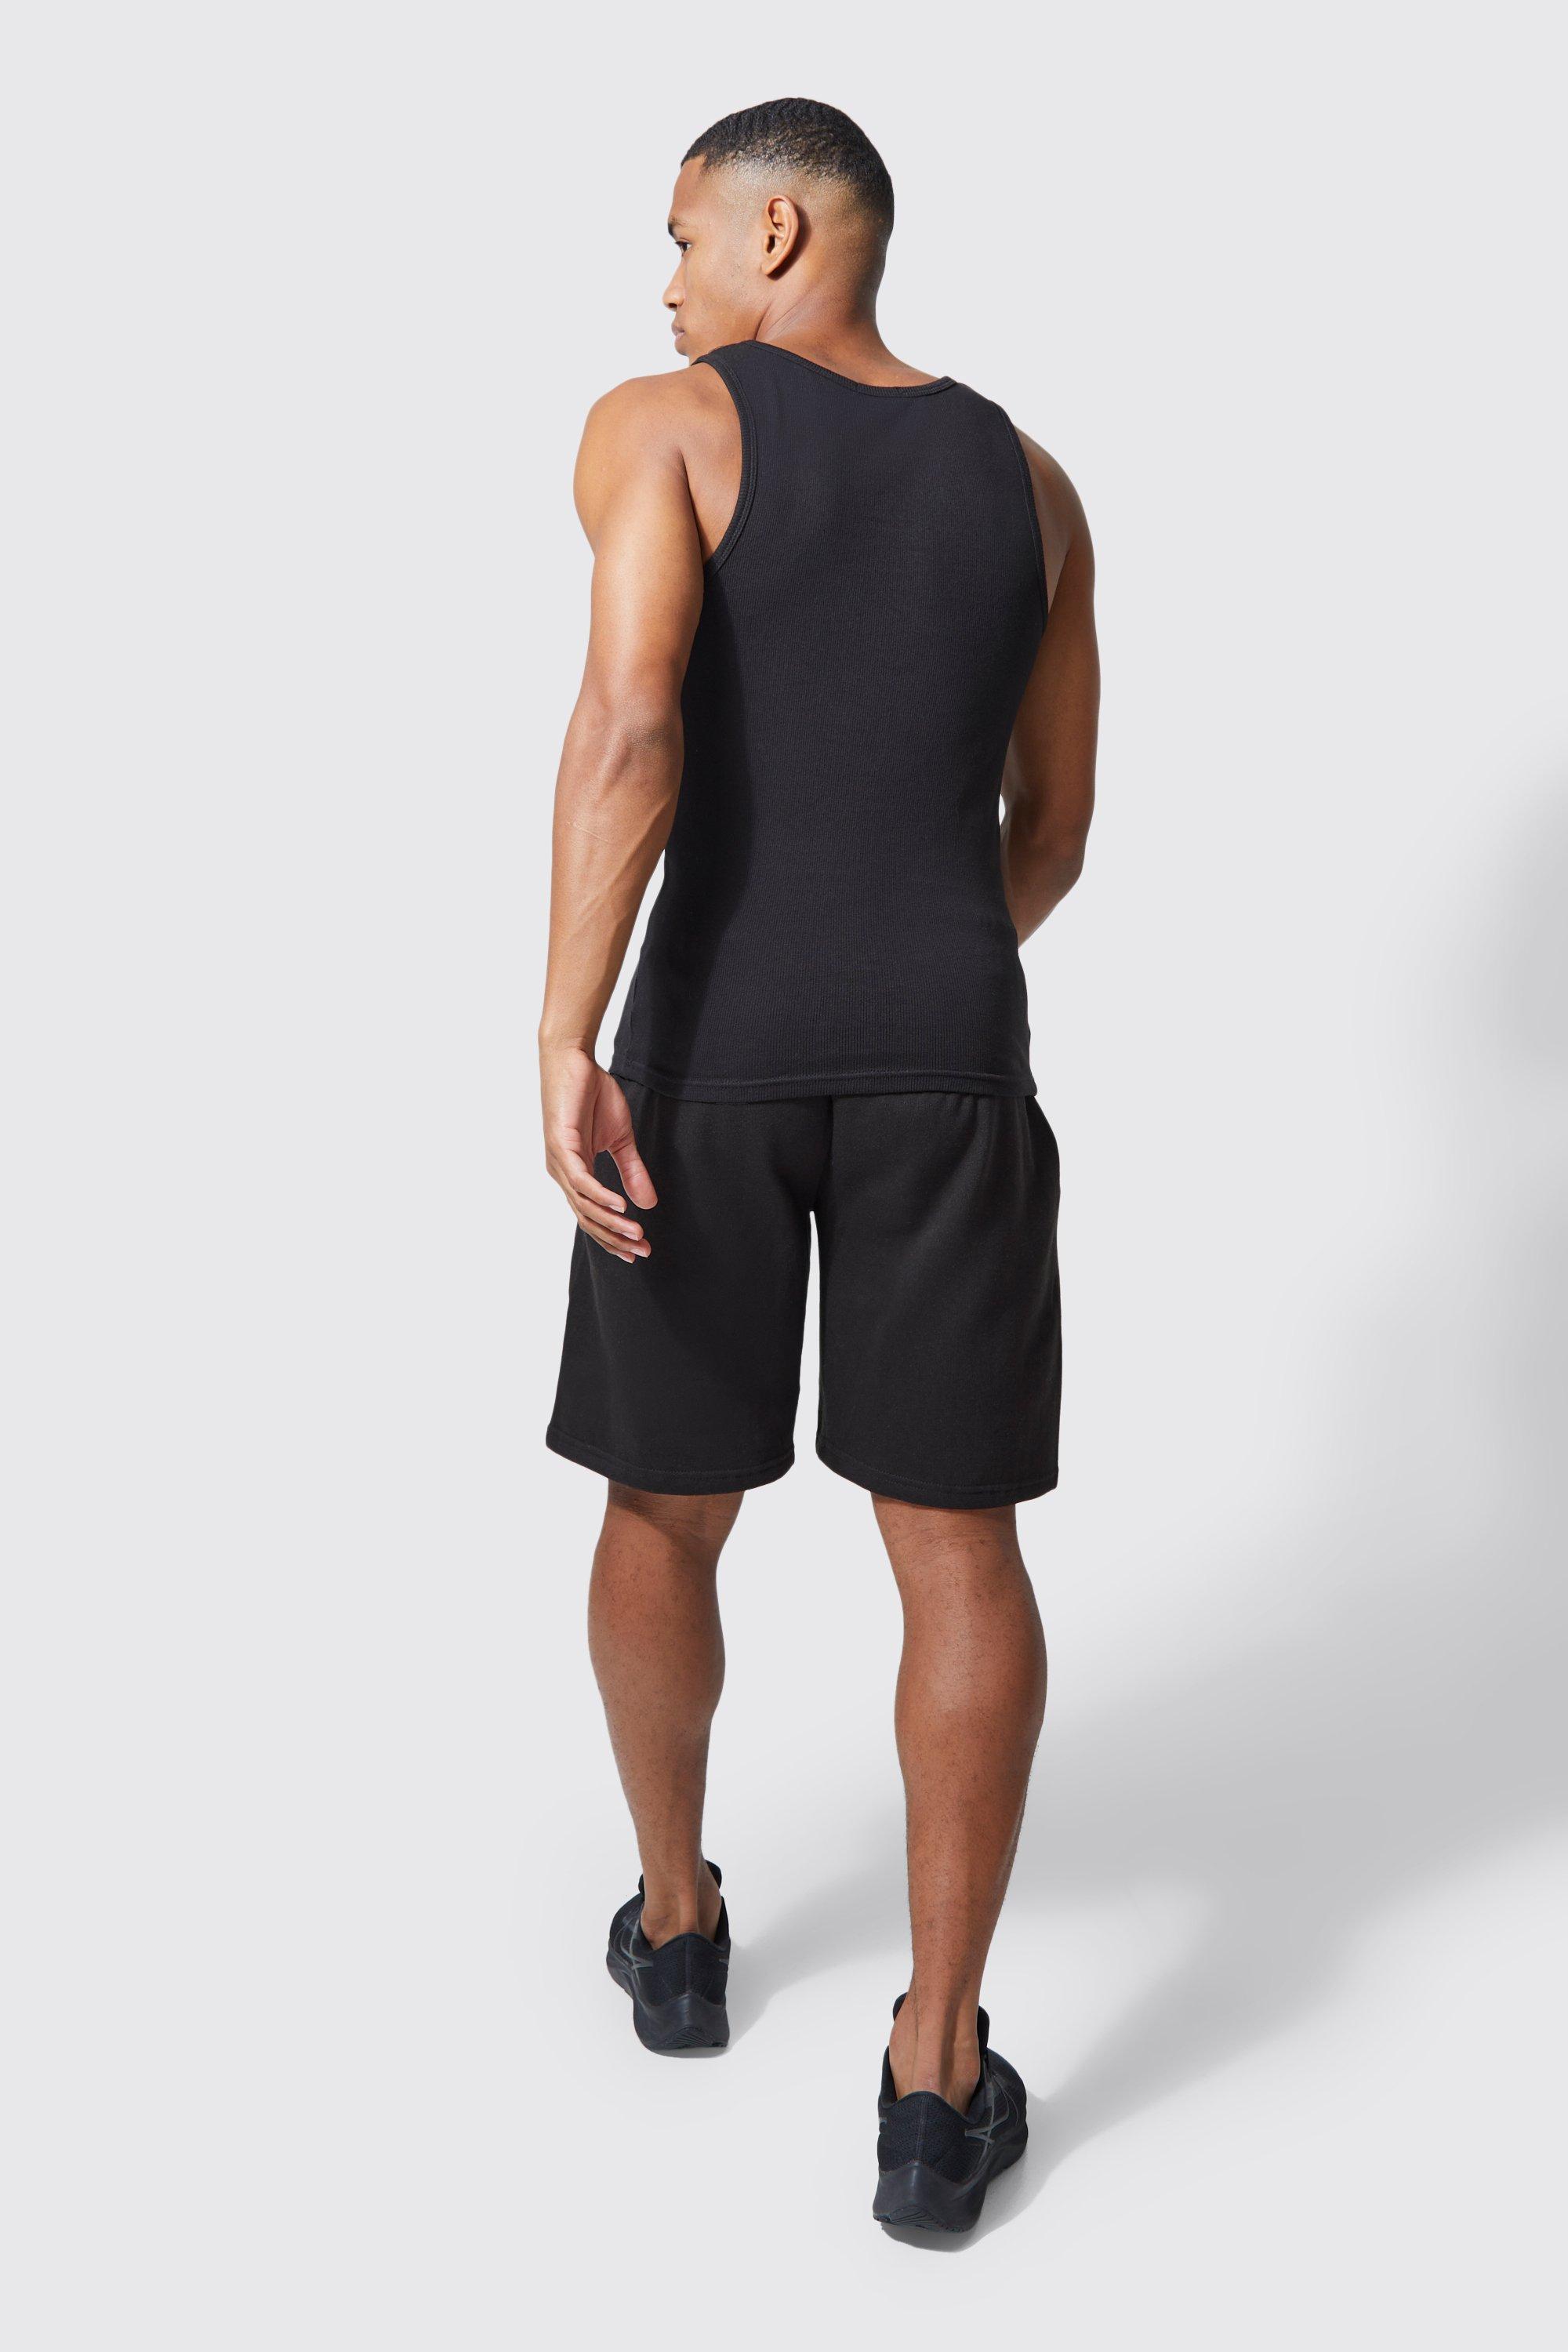 Man Active Gym Muscle Fit Ribbed Vest